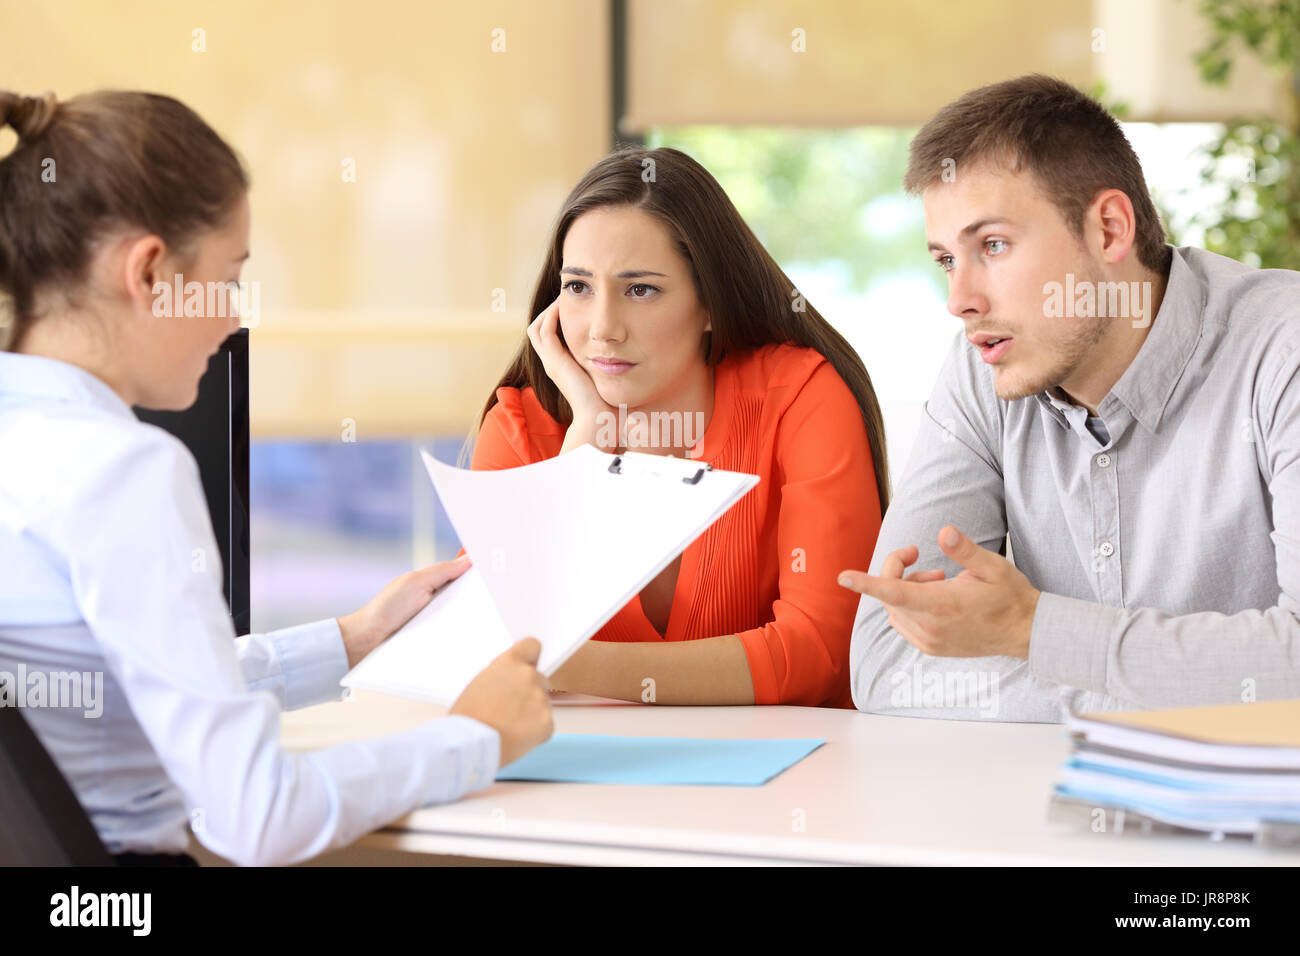 Sad couple with problems talking in a marriage counseling Stock Photo